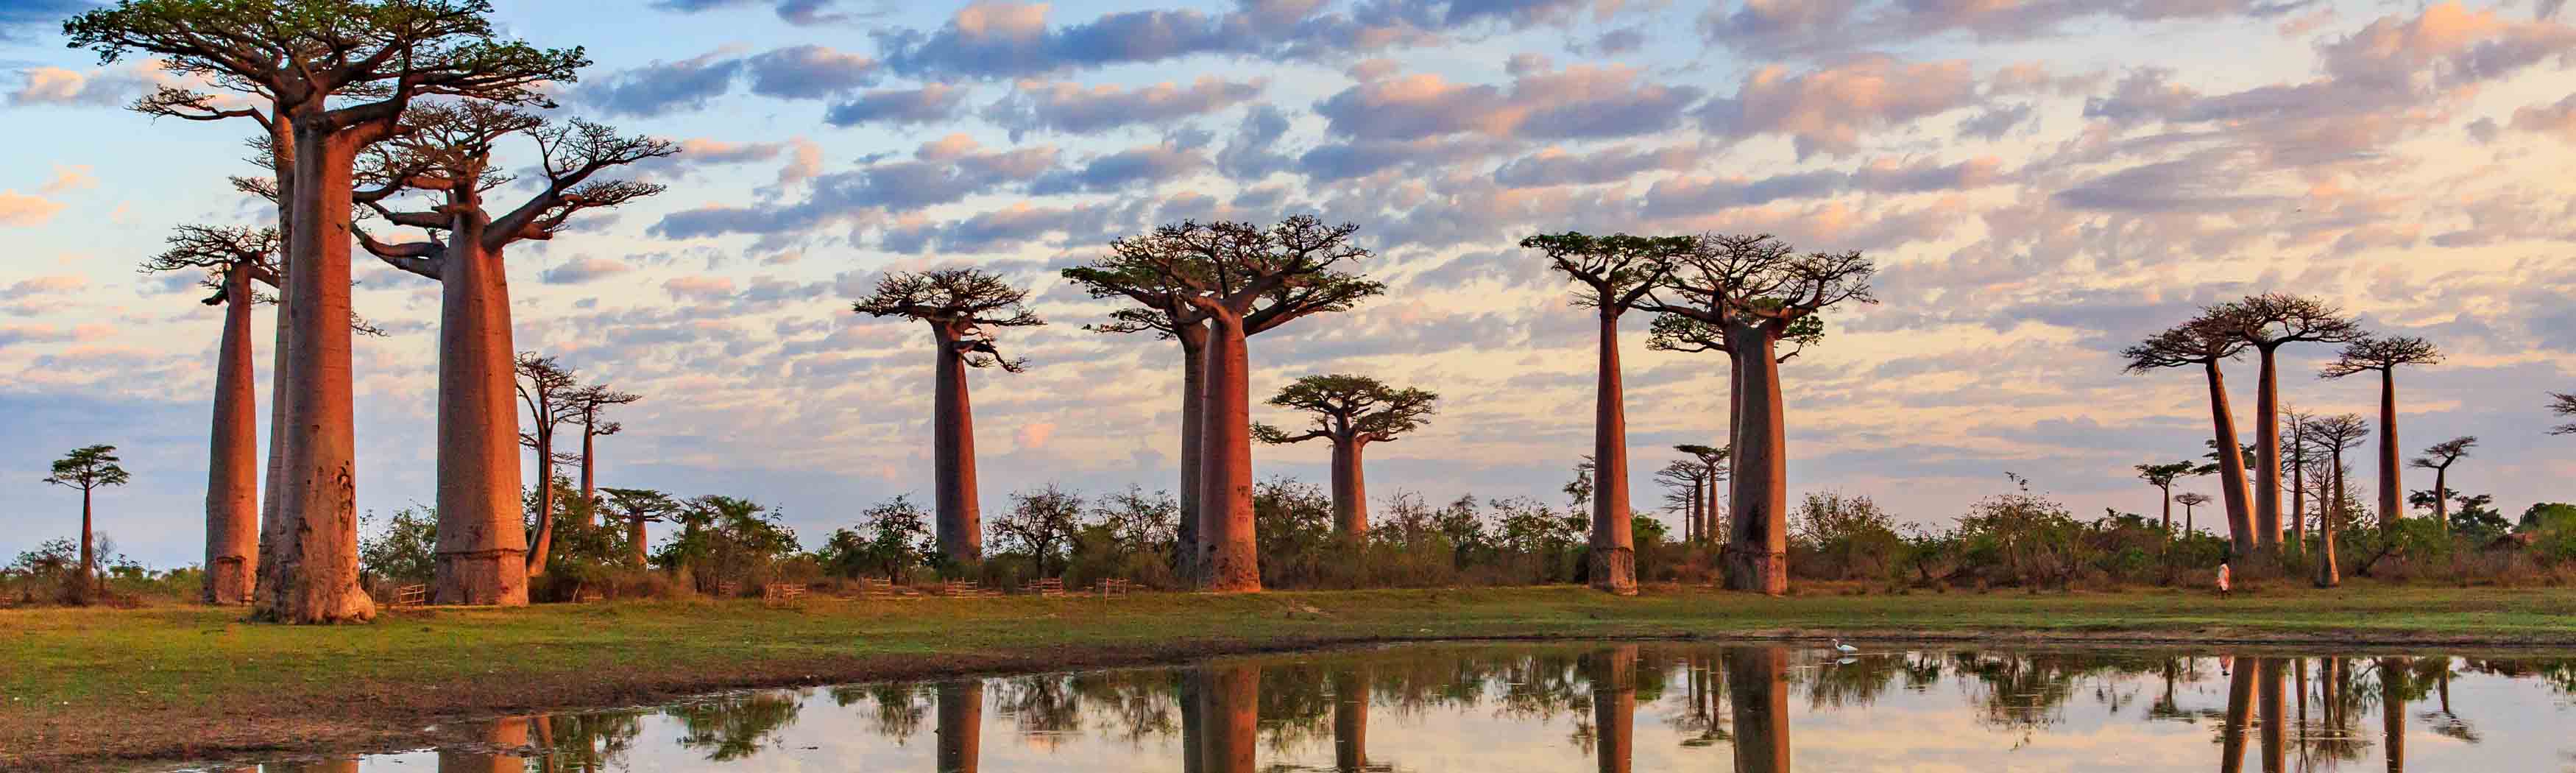 5 Baobab trees in Toliara Province, Madagascar. reflective water in front and cloudy sky.